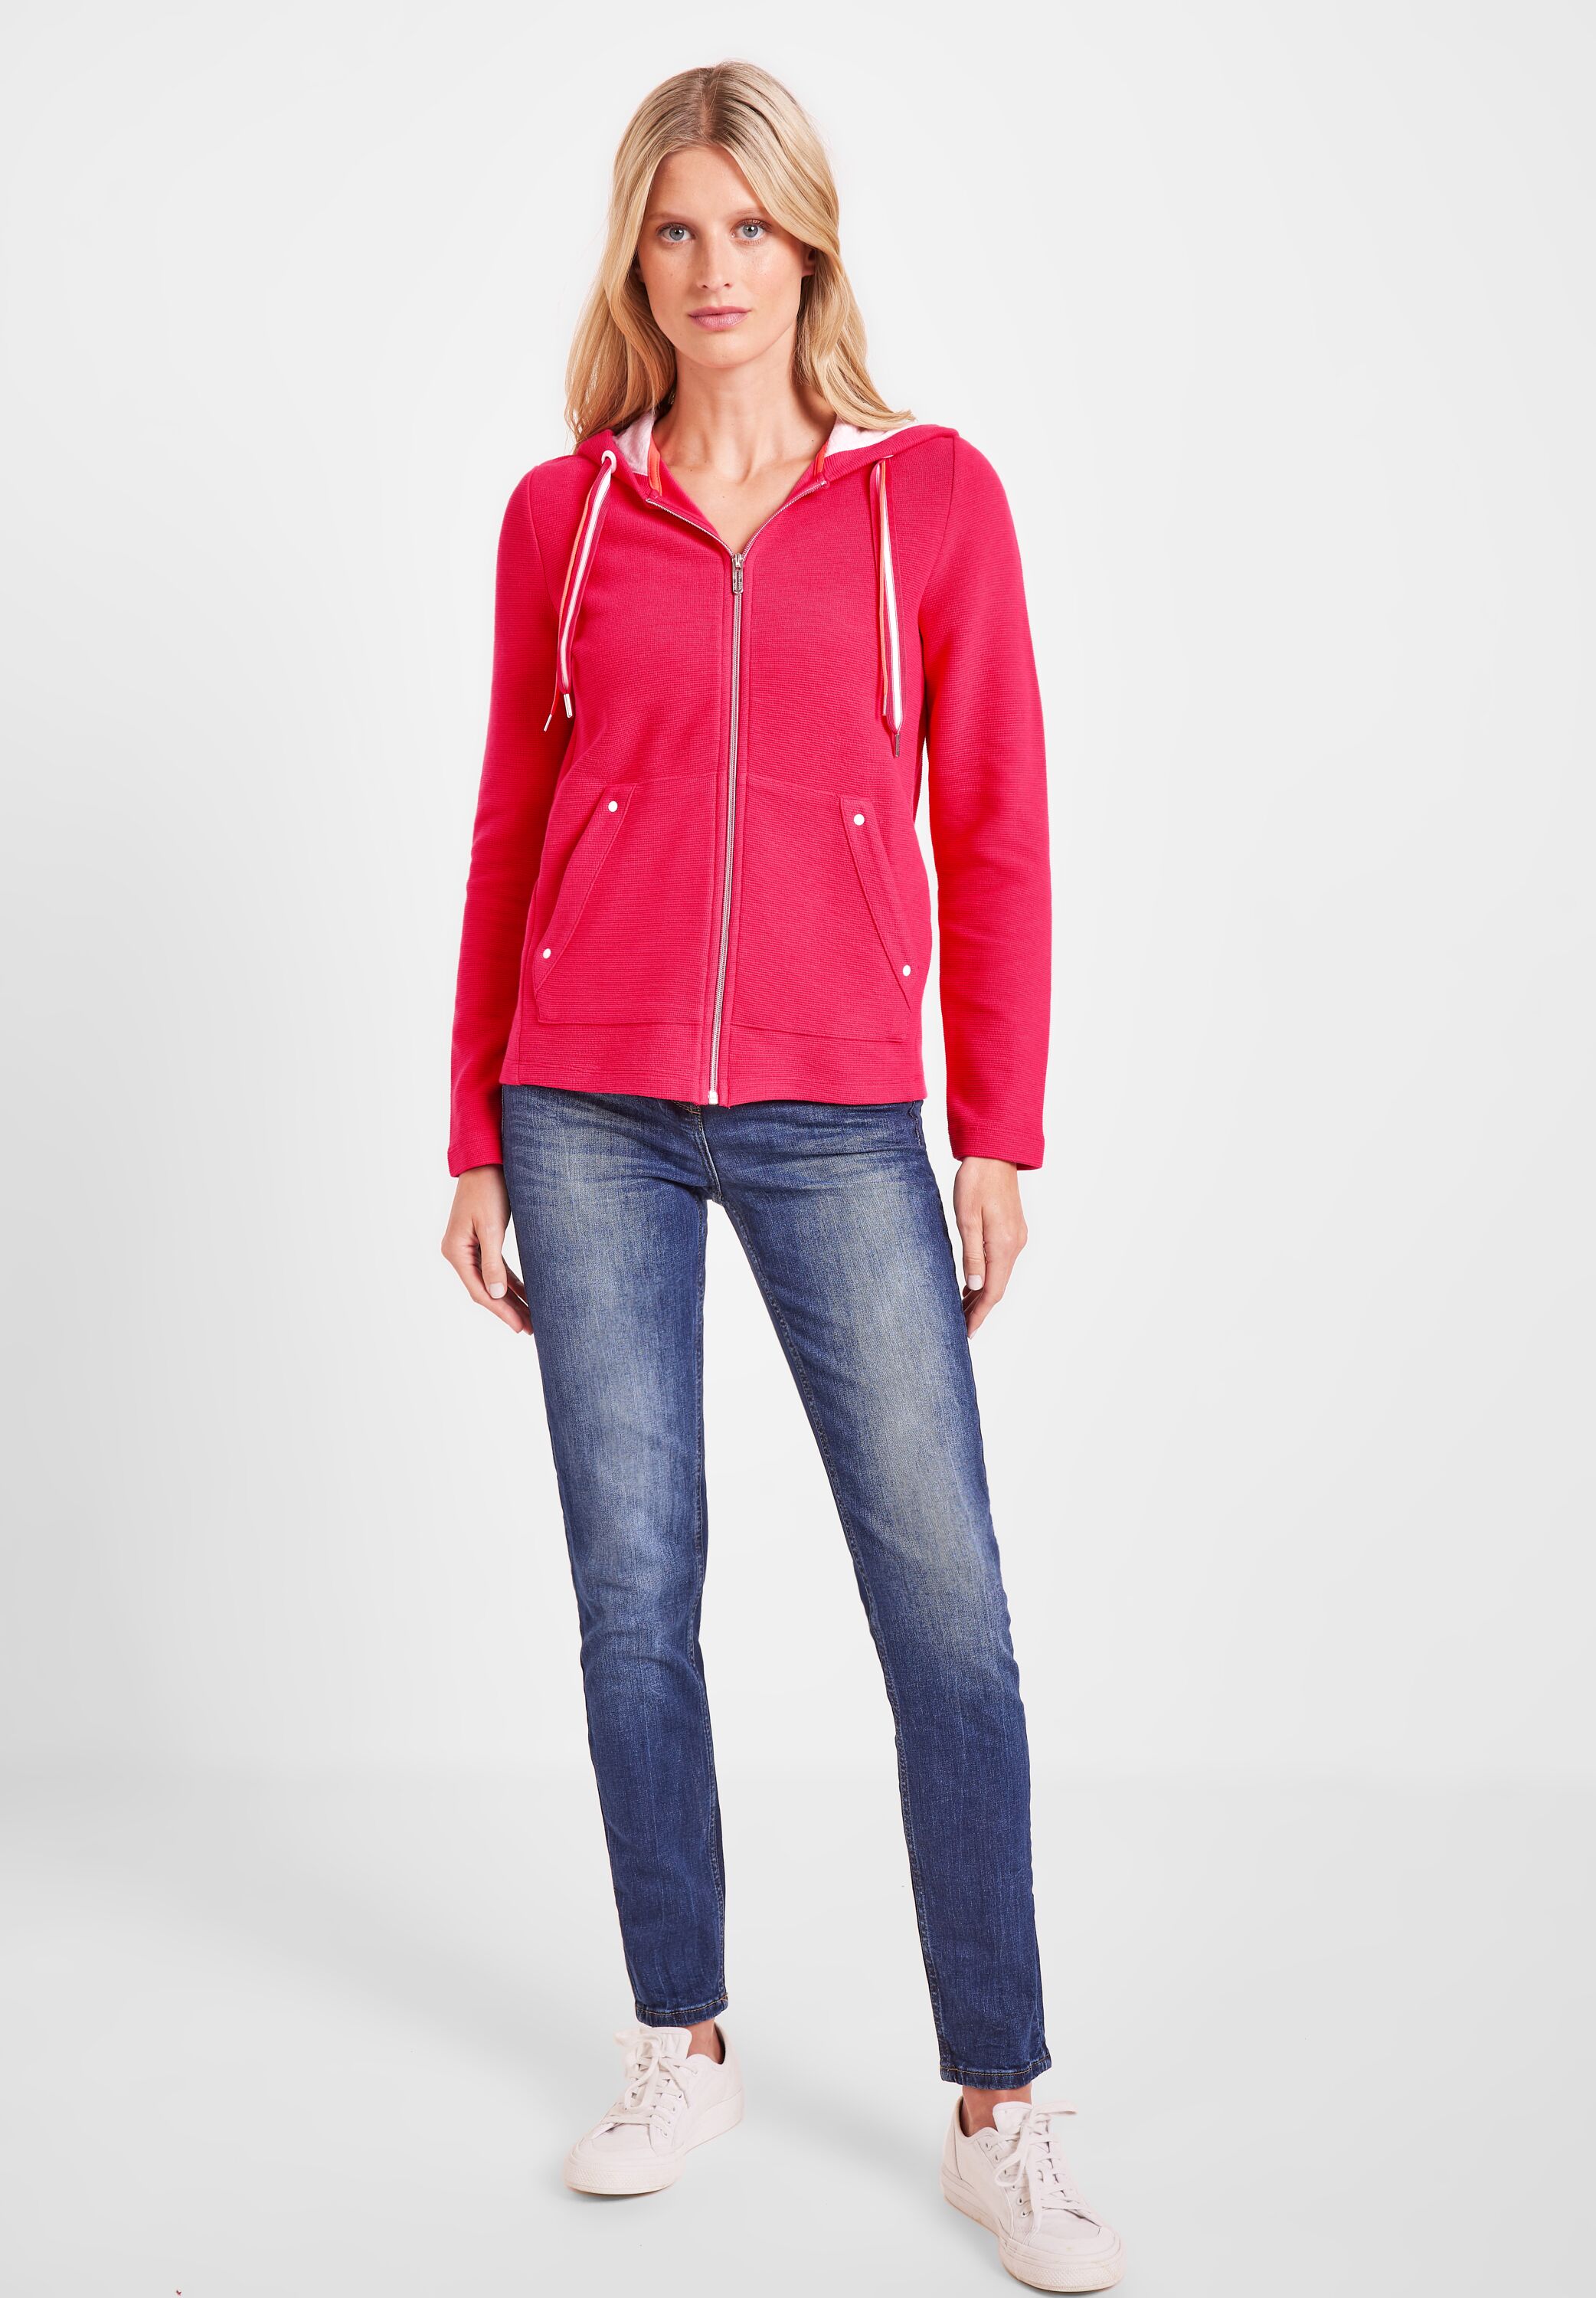 CECIL Shirtjacke in Strawberry Red im SALE reduziert B319398-14472 -  CONCEPT Mode